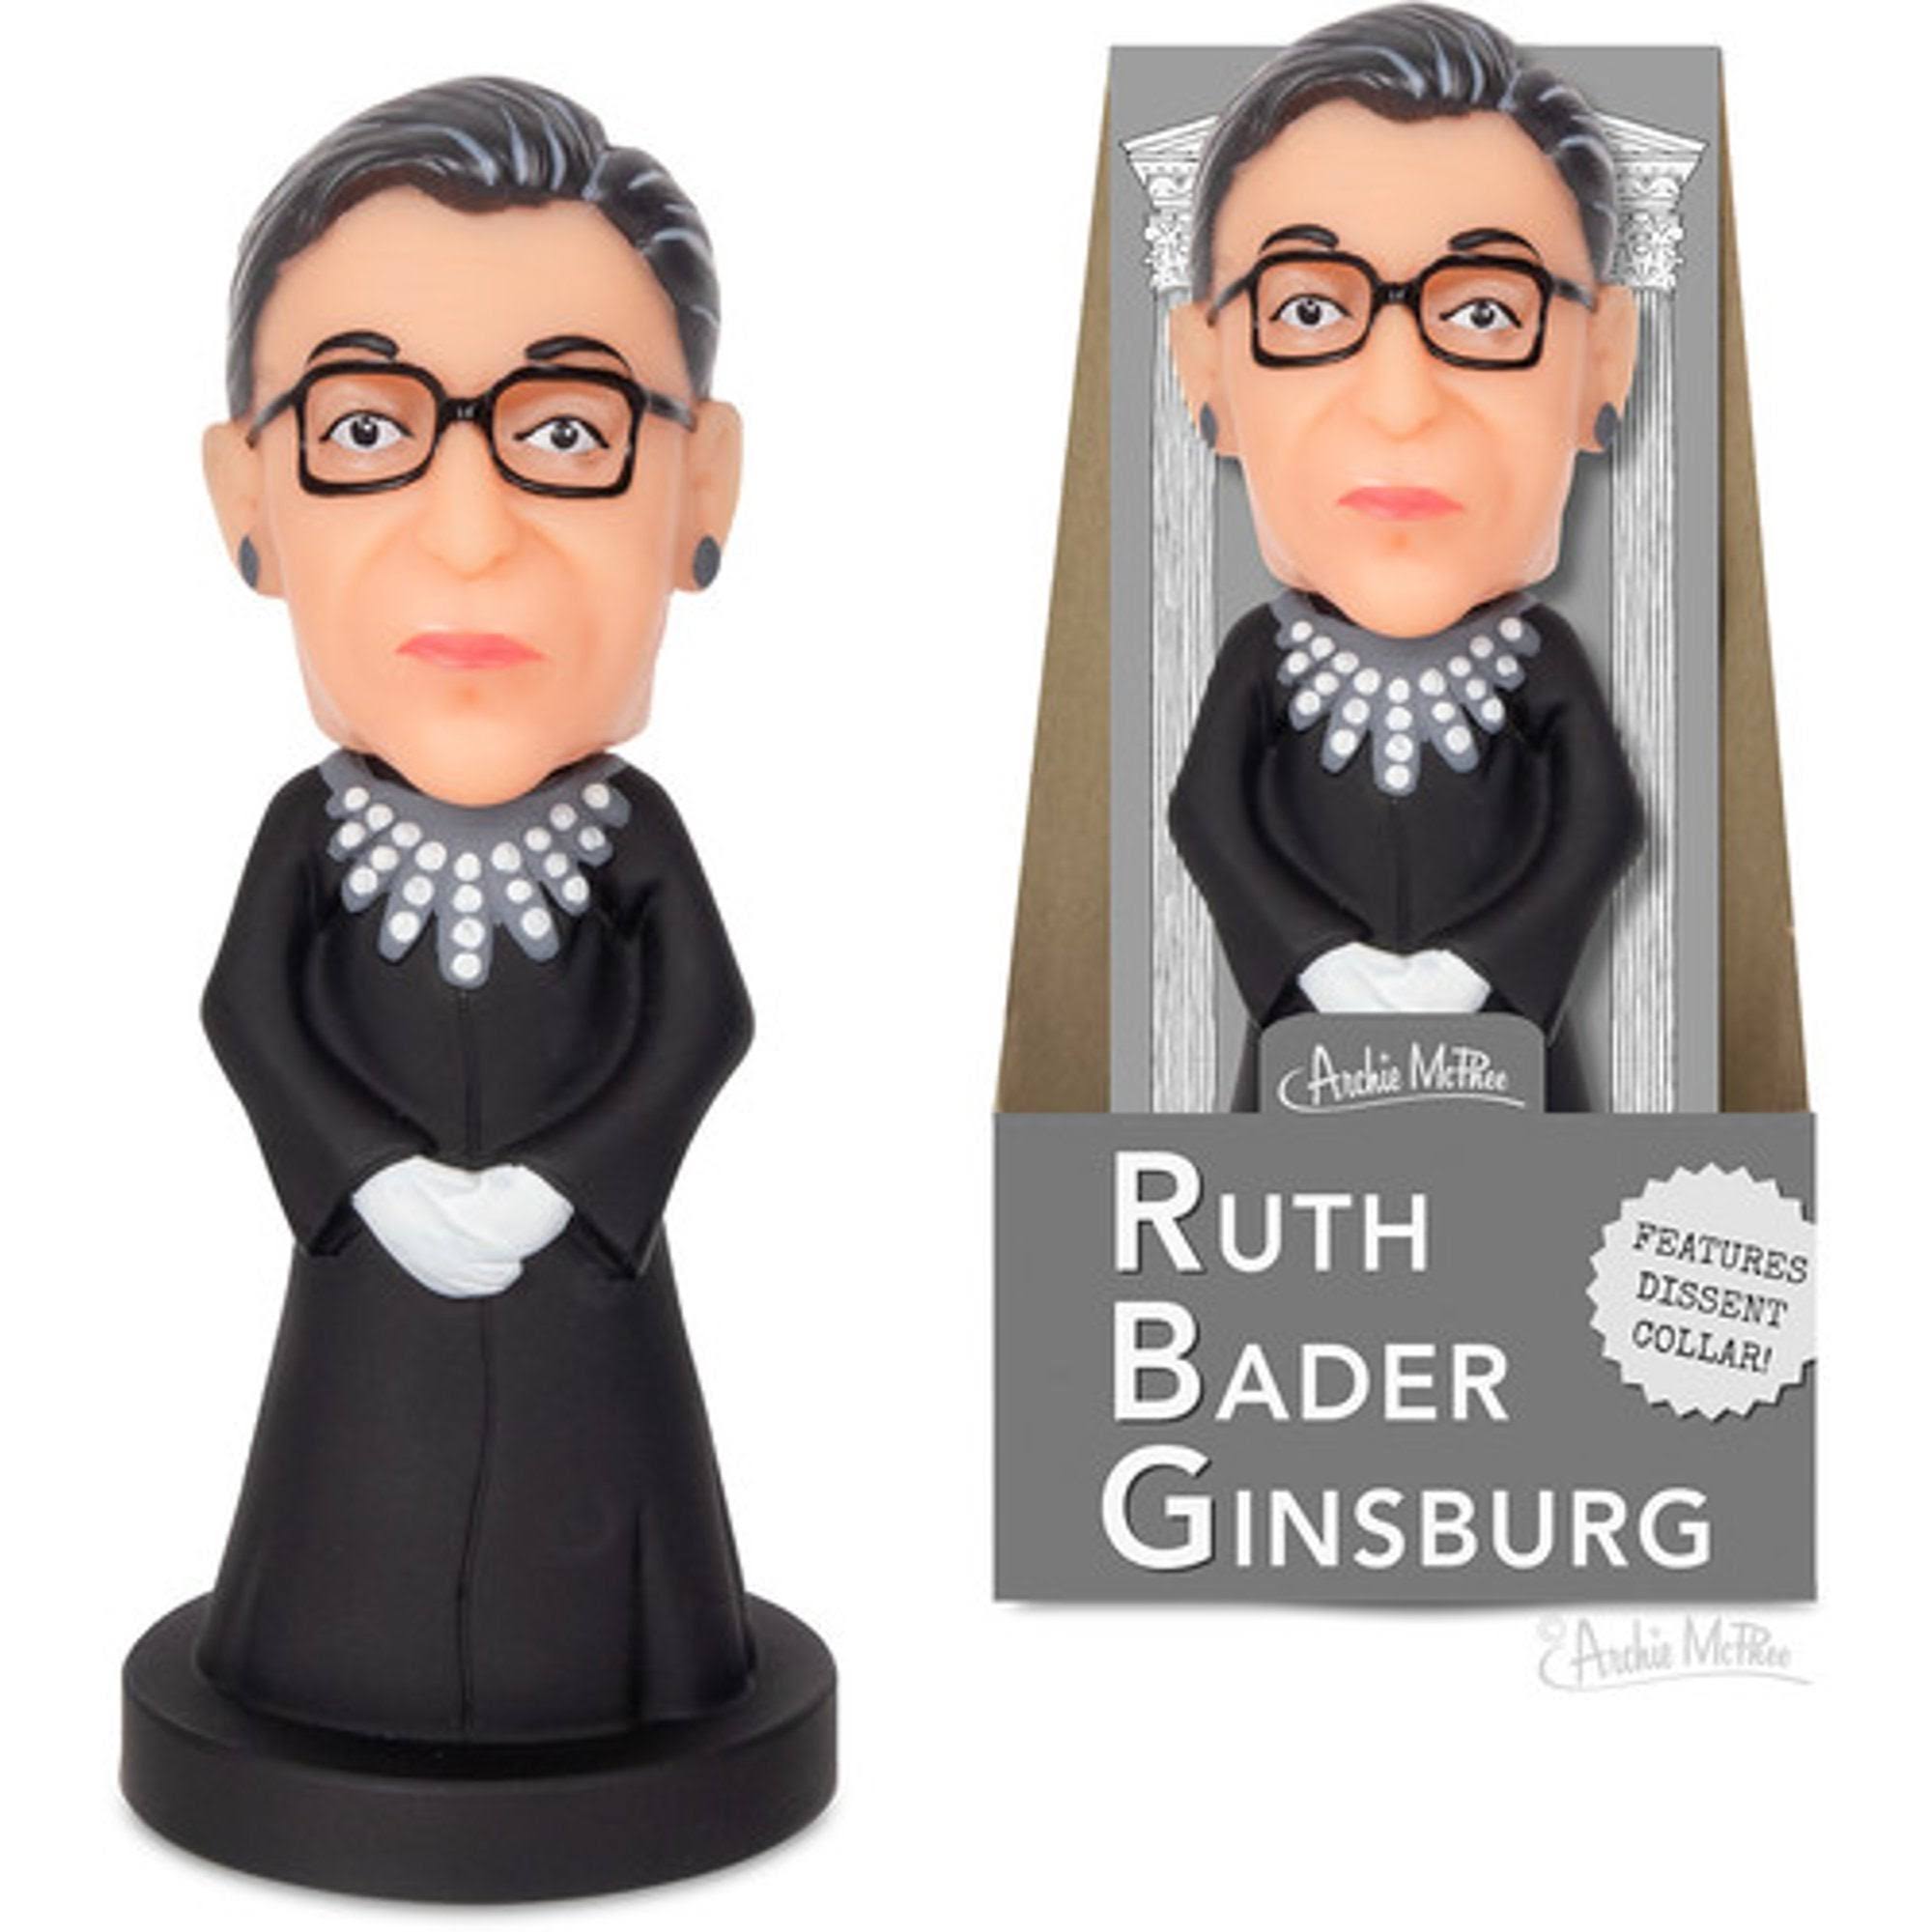 Action Figure - Archie McPhee - Ruth Bader Ginsburg Nodder New 12850